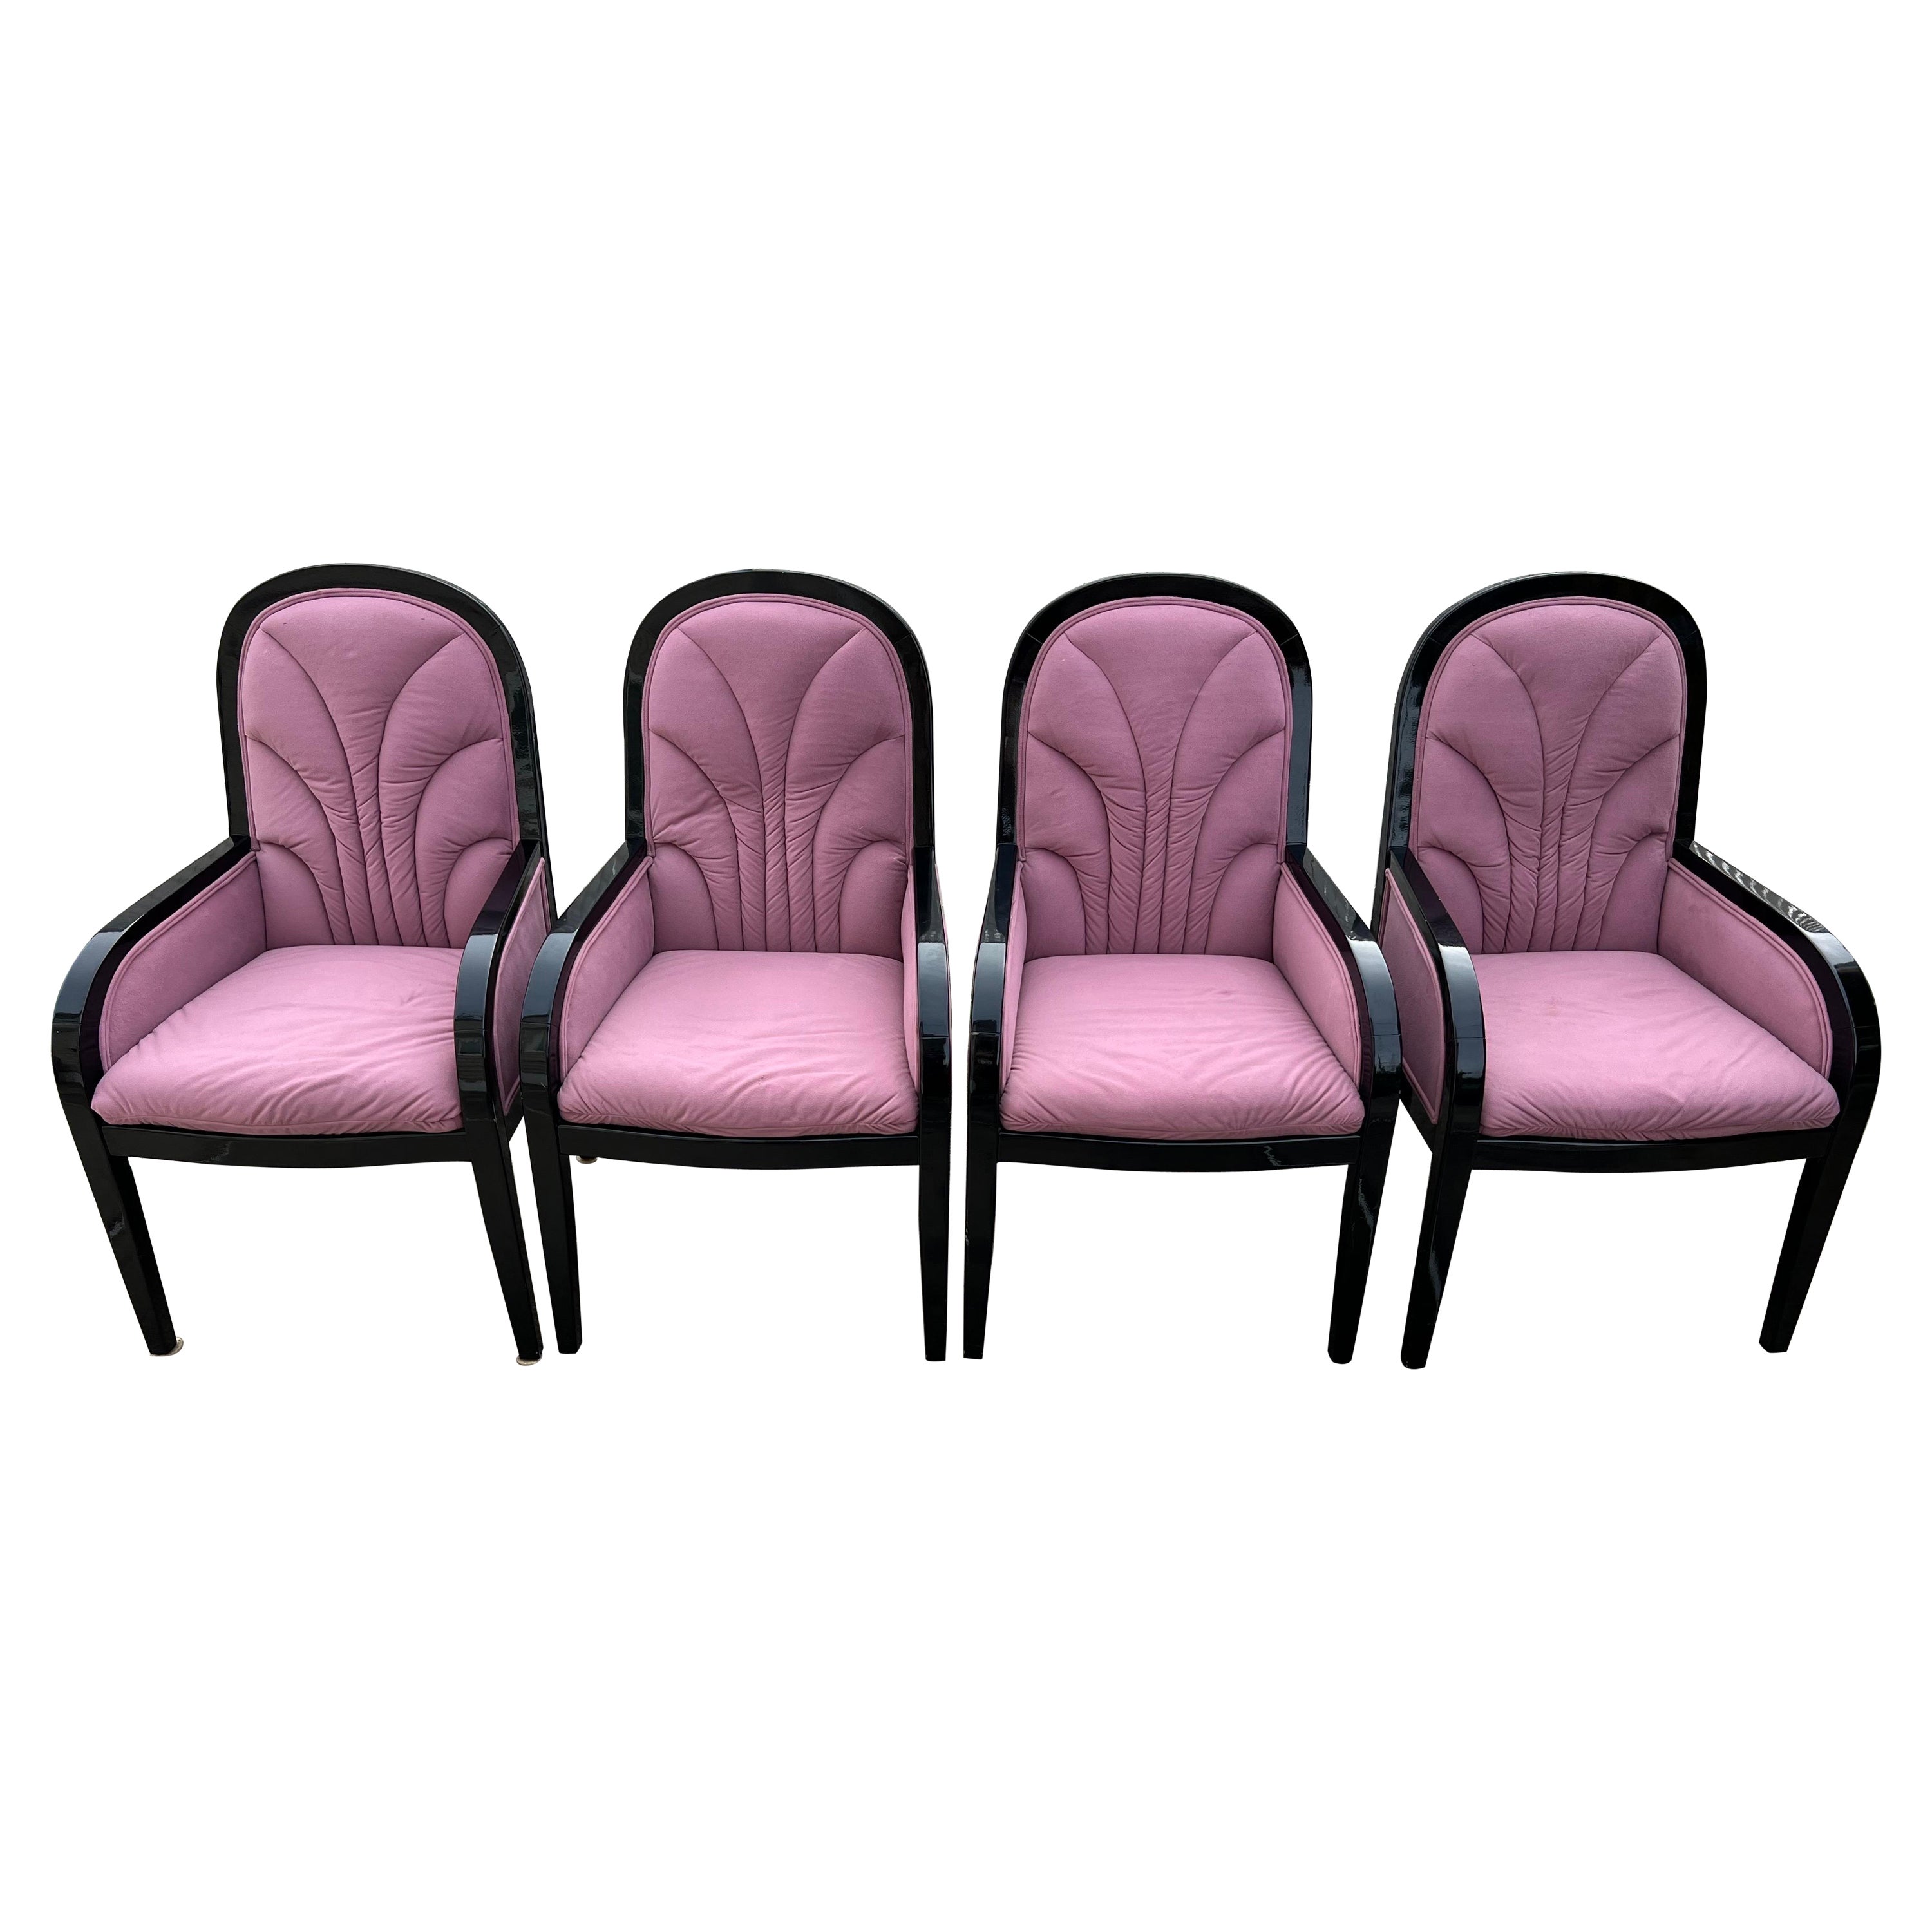 1980s Black Lacquered Pink Velvet Dining Chairs - a Set of 4 For Sale